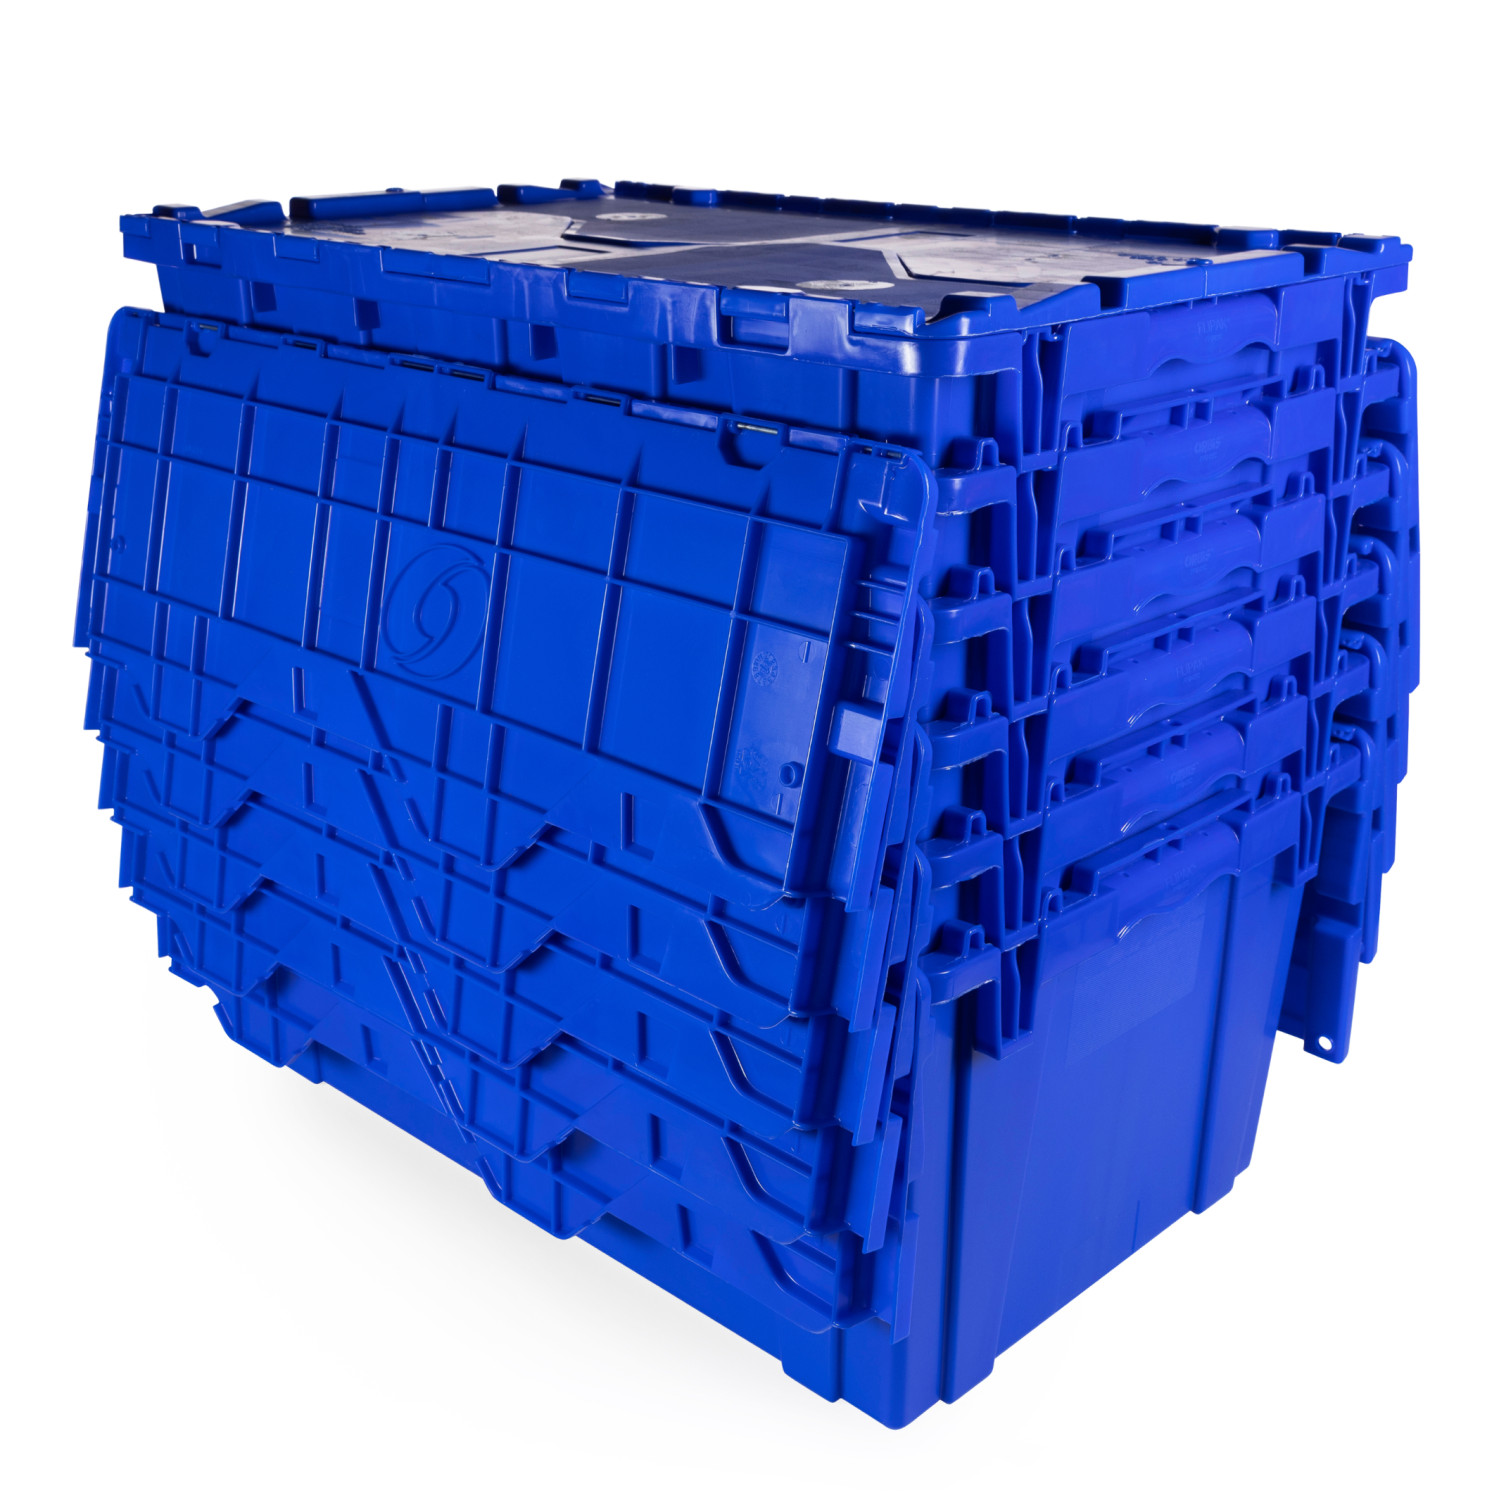 https://idlpack.com/image/cache/catalog/Products/Containers/2000x2000%20Blue%20Plastic%20Box%2026.9x16.9x12.1_white_bg%206%20(2)-1500x1500.jpg